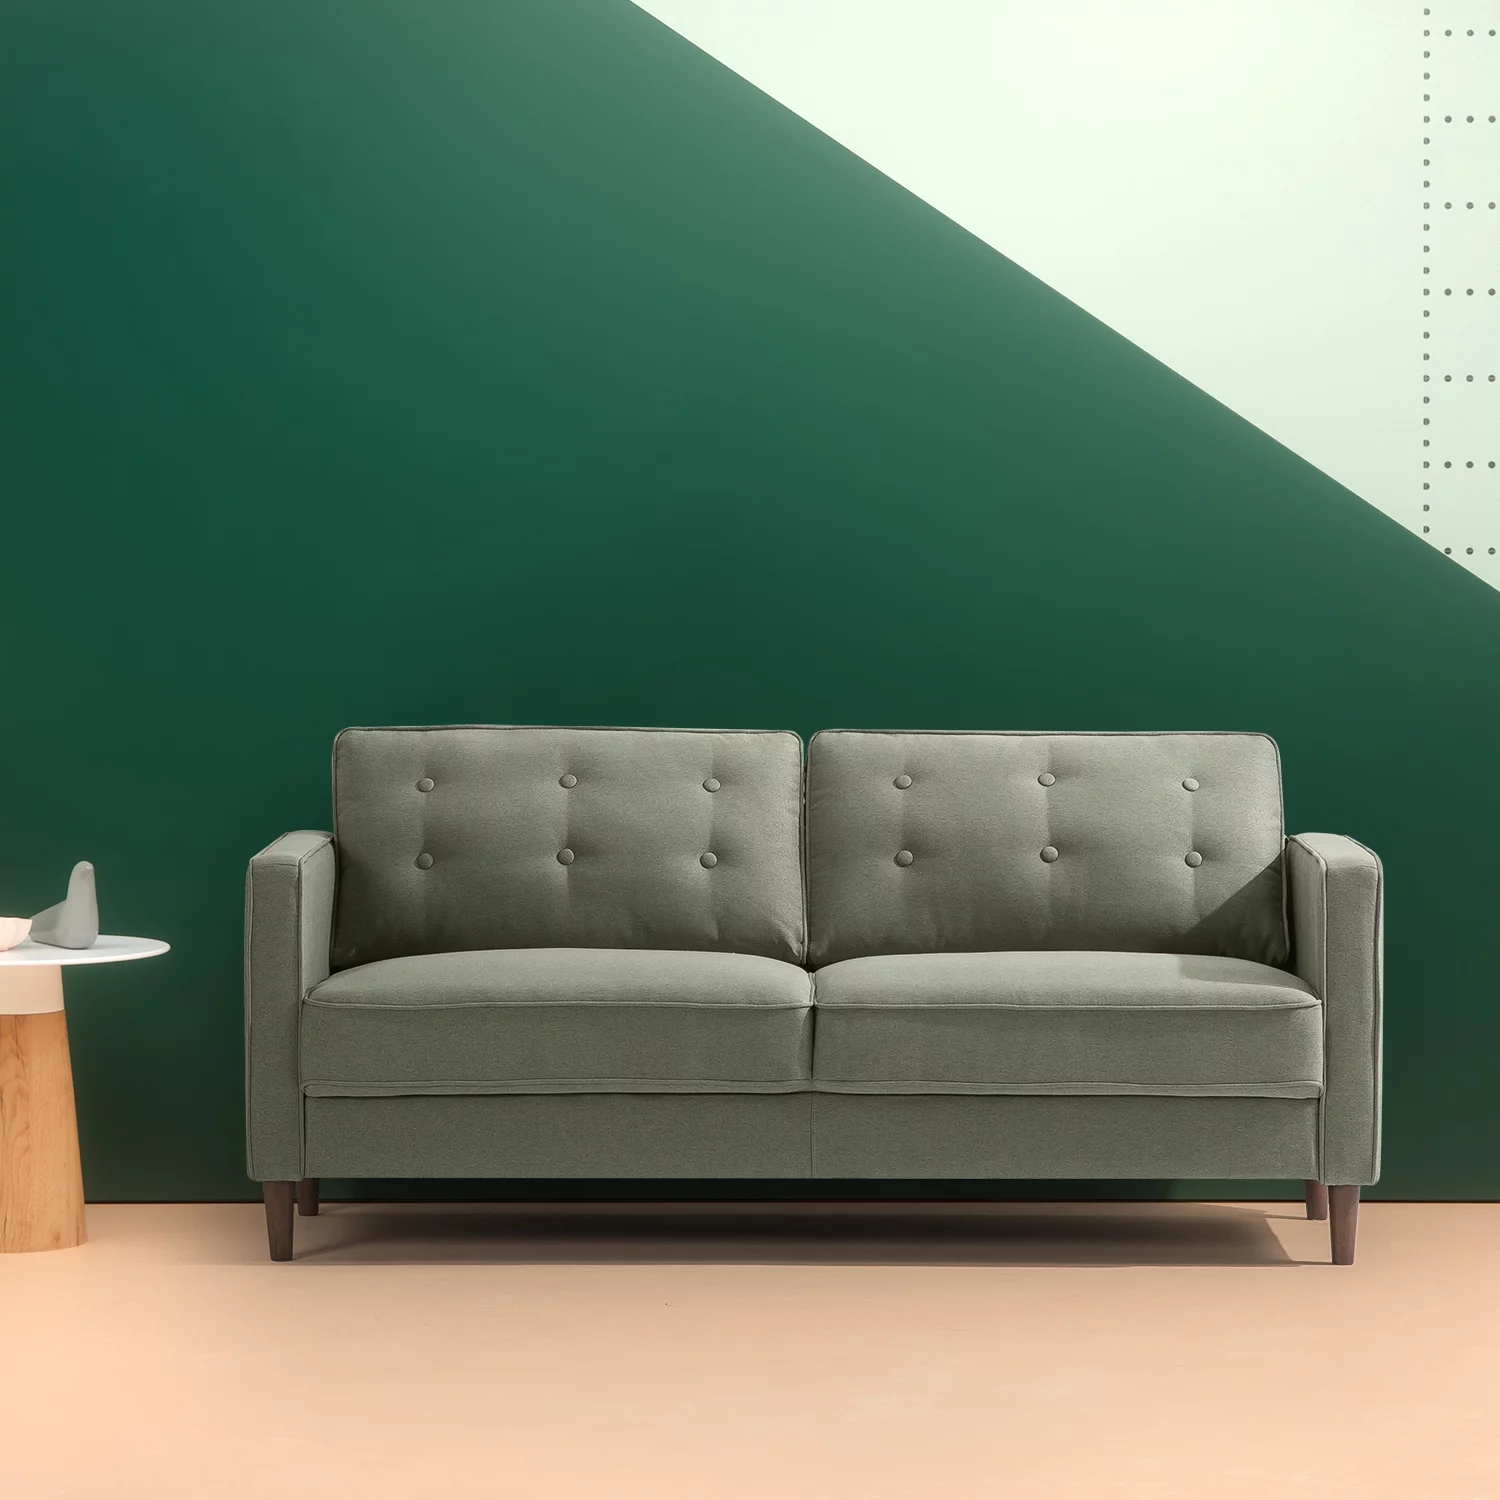 Zinus Lauren Mid-Century Button Tufted Upholstered 74" Sofa, Pear Green